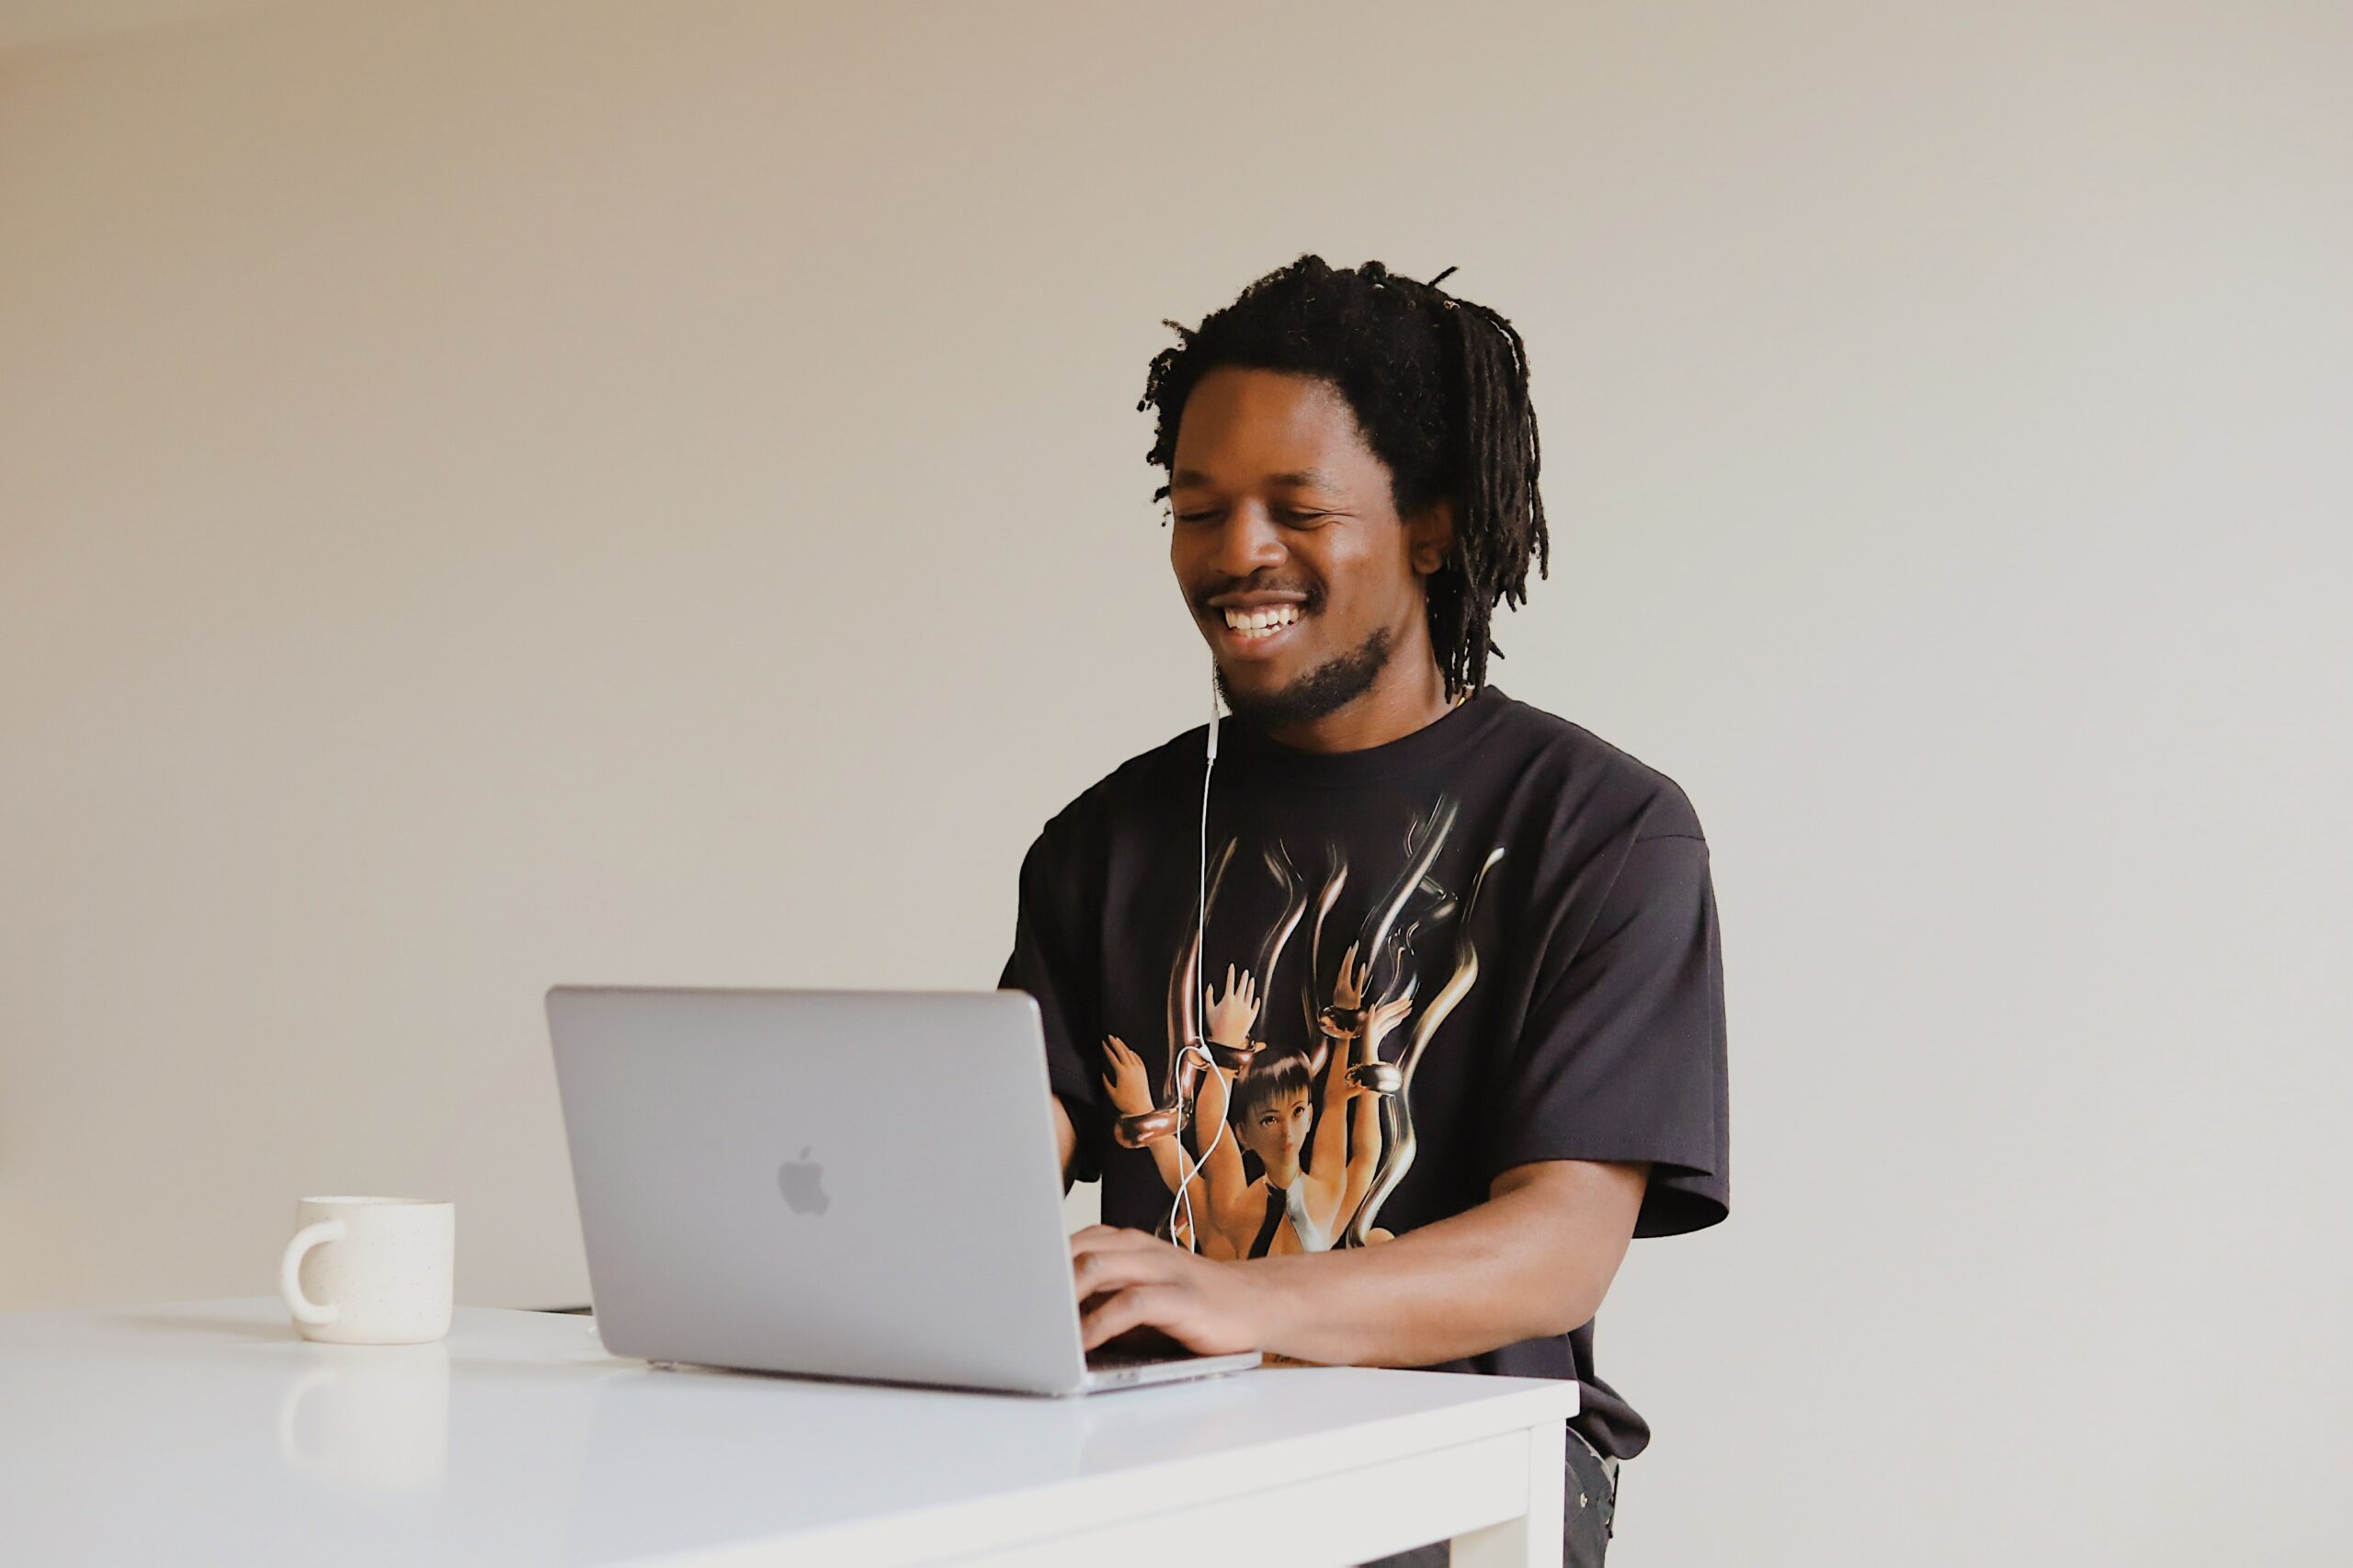 a young black man sits in a white room at a laptop he is smiling and laughing